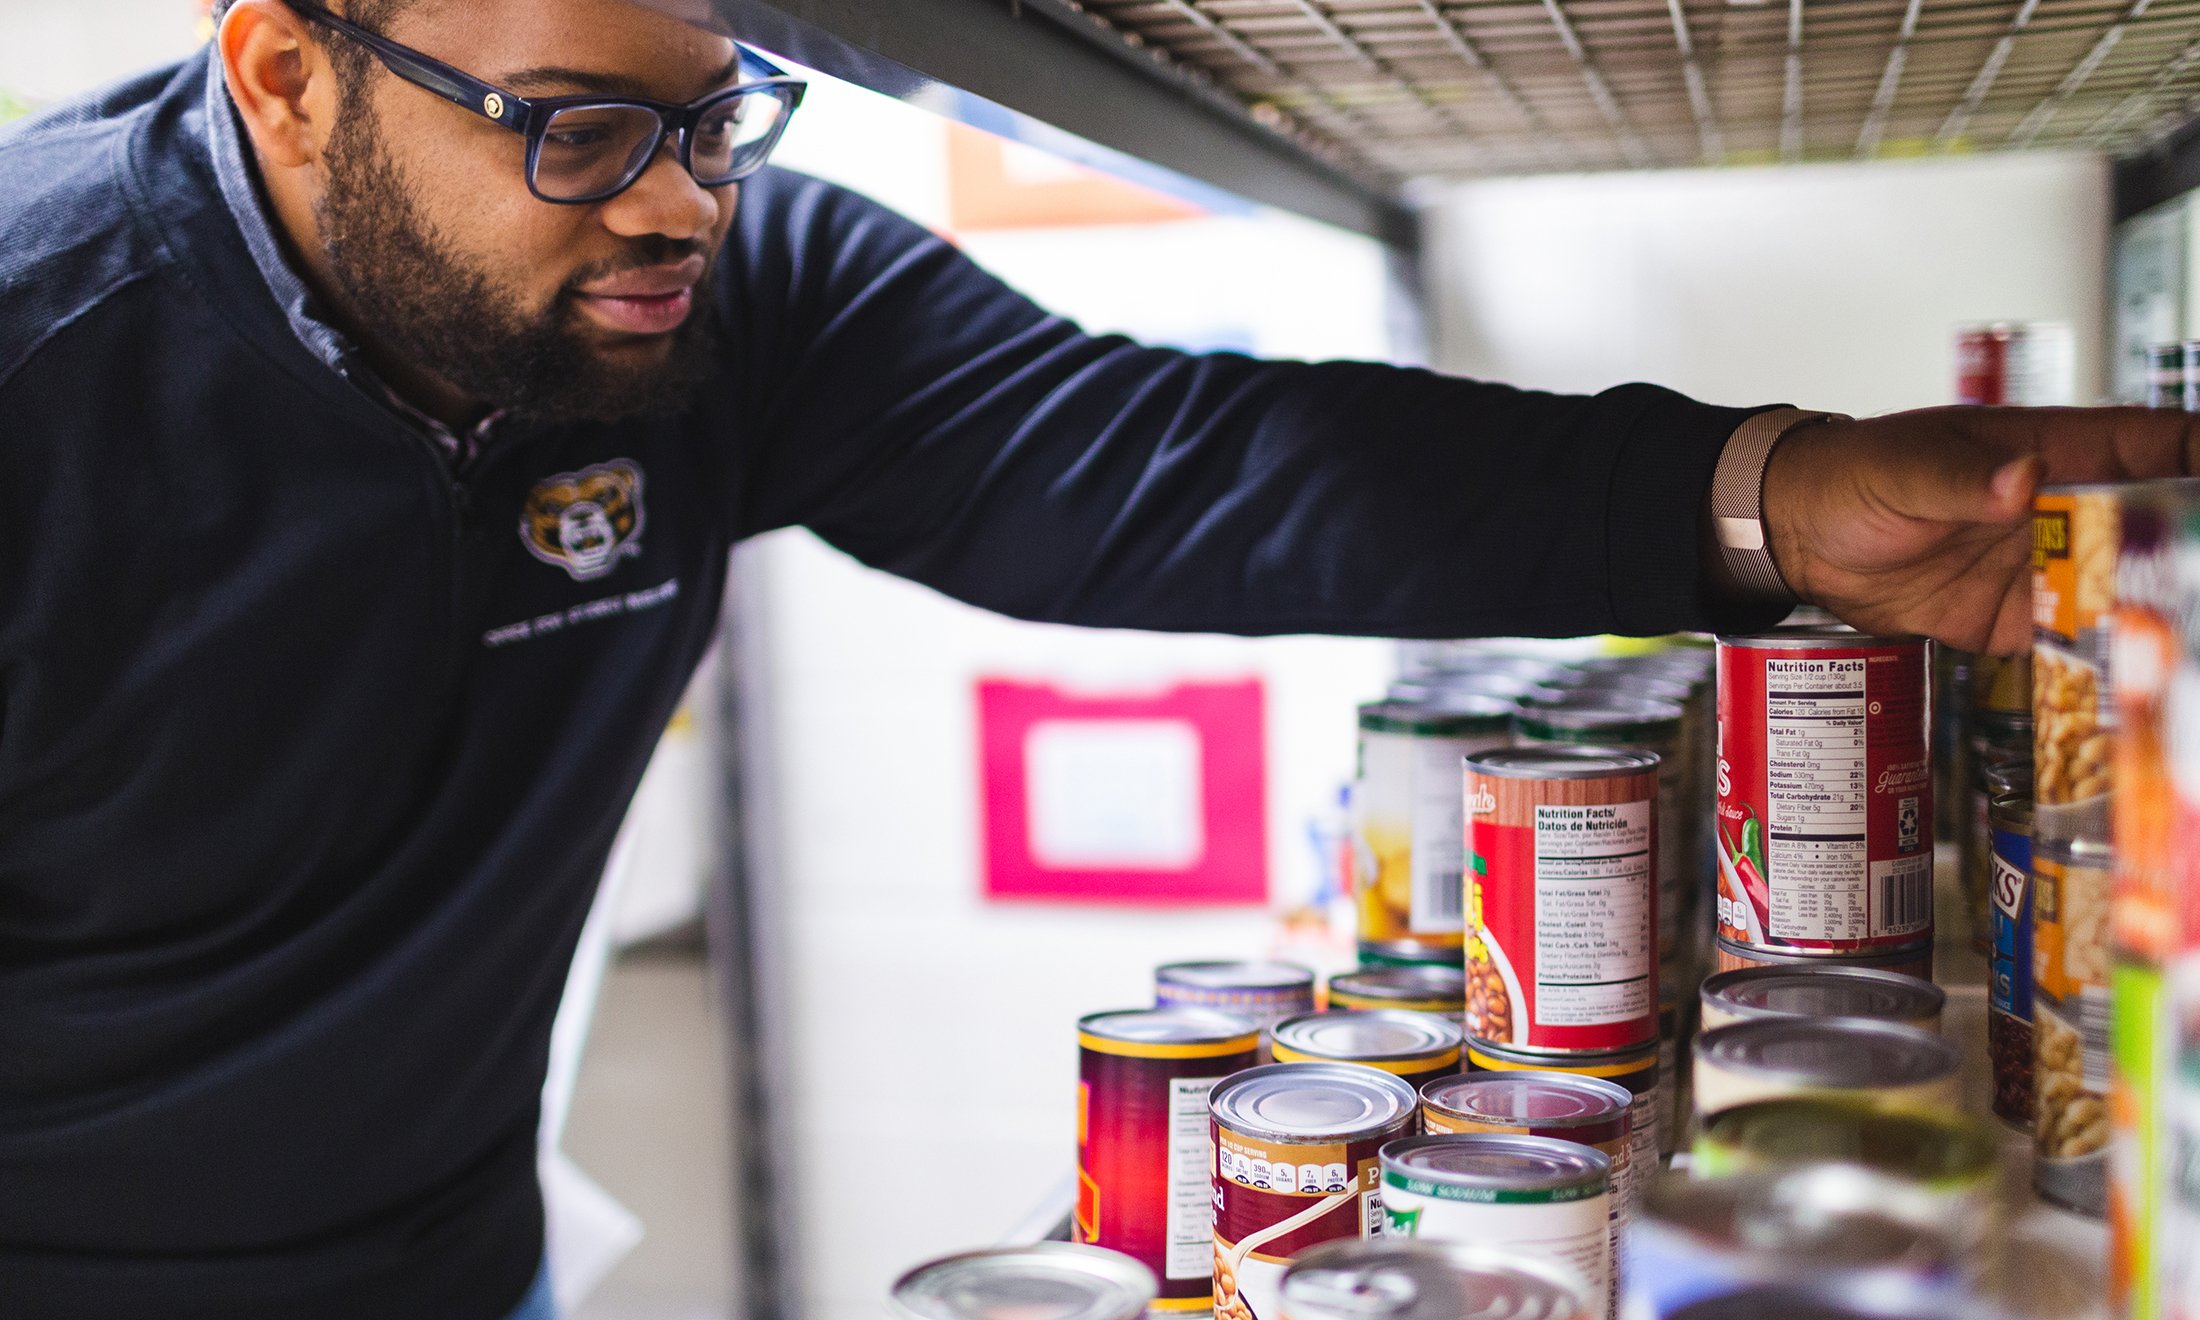 A photo of a man stocking shelves with canned goods.